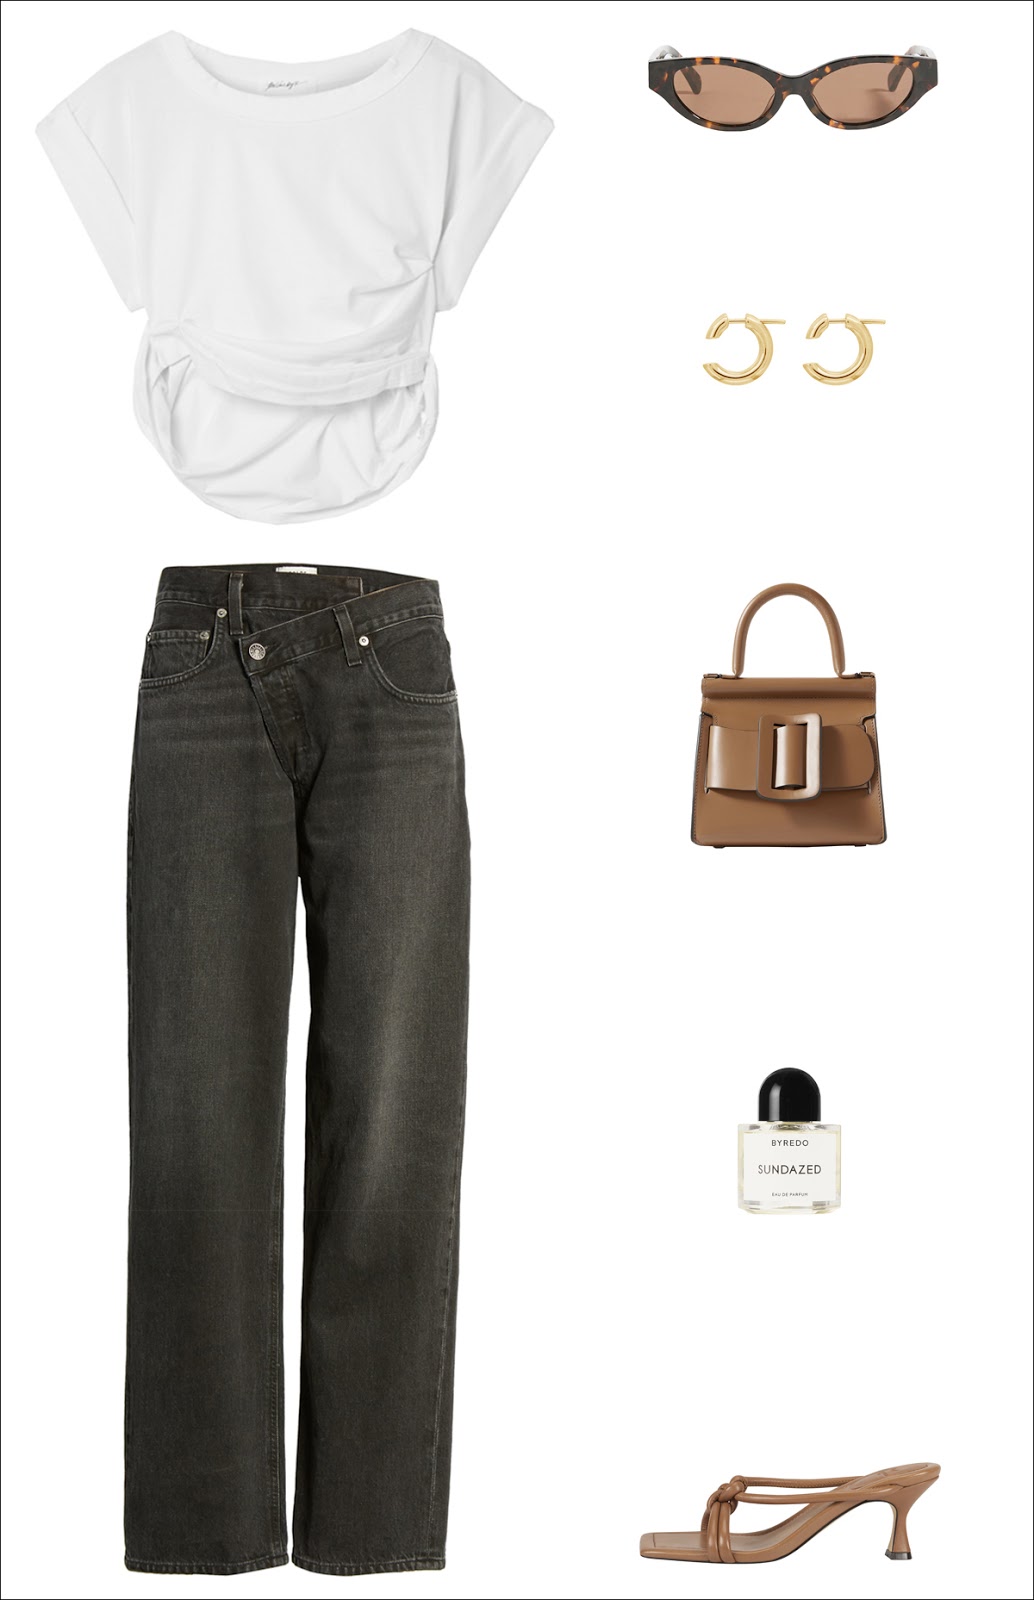 Cool Summer Outfit Idea — Cropped White T-Shirt, Cat-Eye Sunglasses, Edgy Hoop Earrings, Taupe Mini Bag, Criss-Cross Front Black Jeans, and Light Brown Heeled Slide Sandals